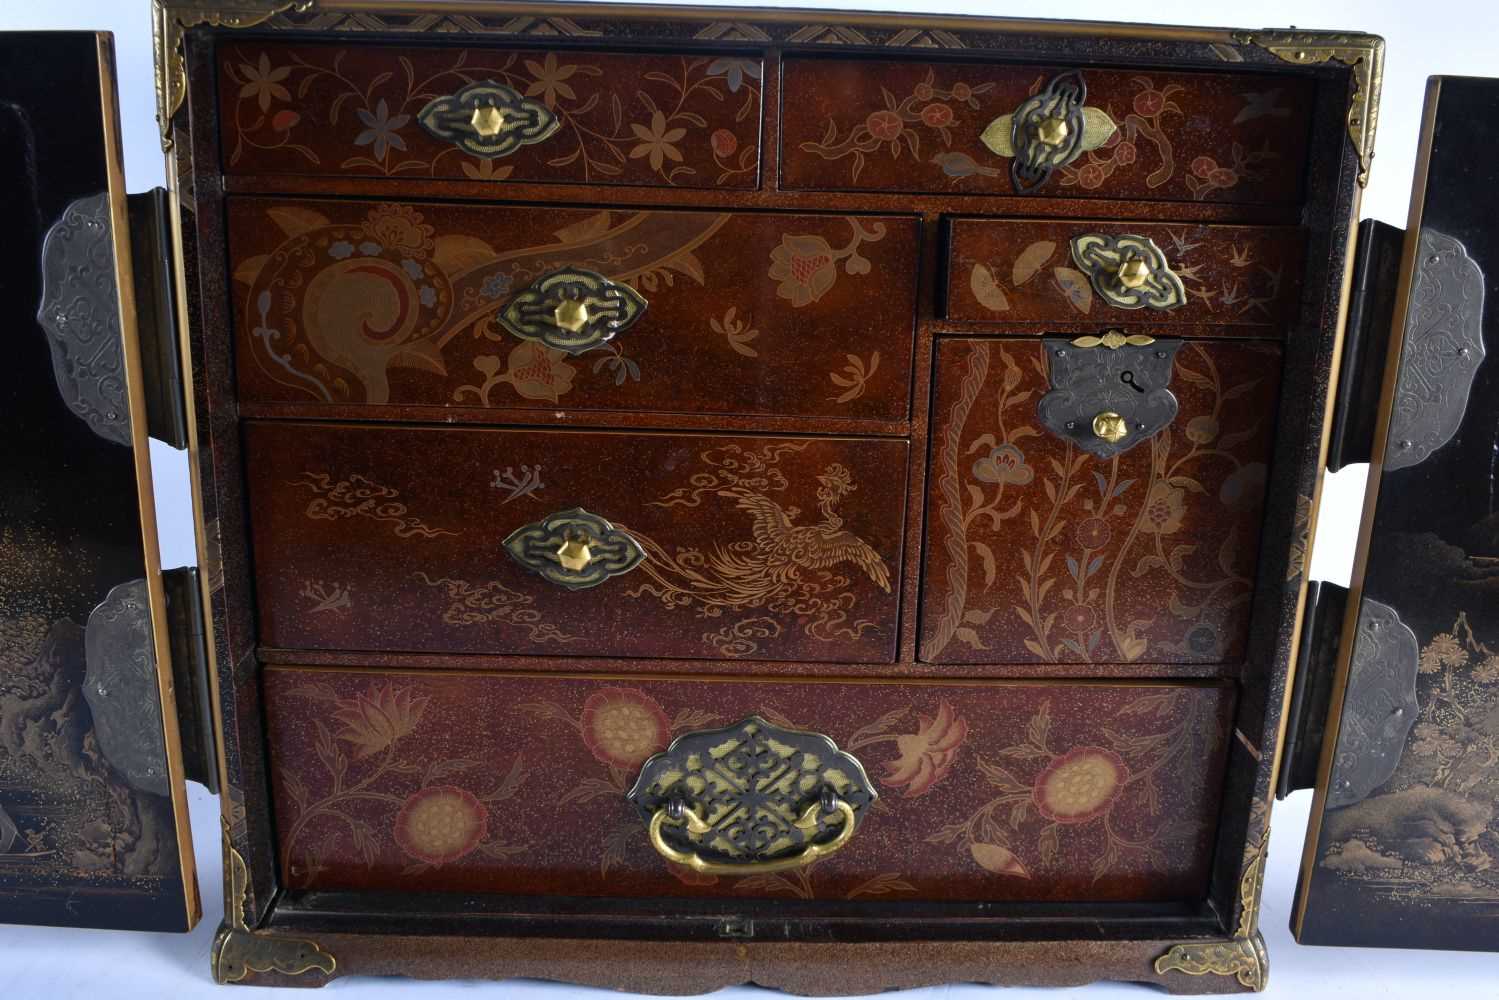 A VERY FINE 18TH/19TH CENTURY JAPANESE EDO PERIOD LACQUERED TABLE CABINET by Tsurushita Chouji, upon - Image 20 of 32